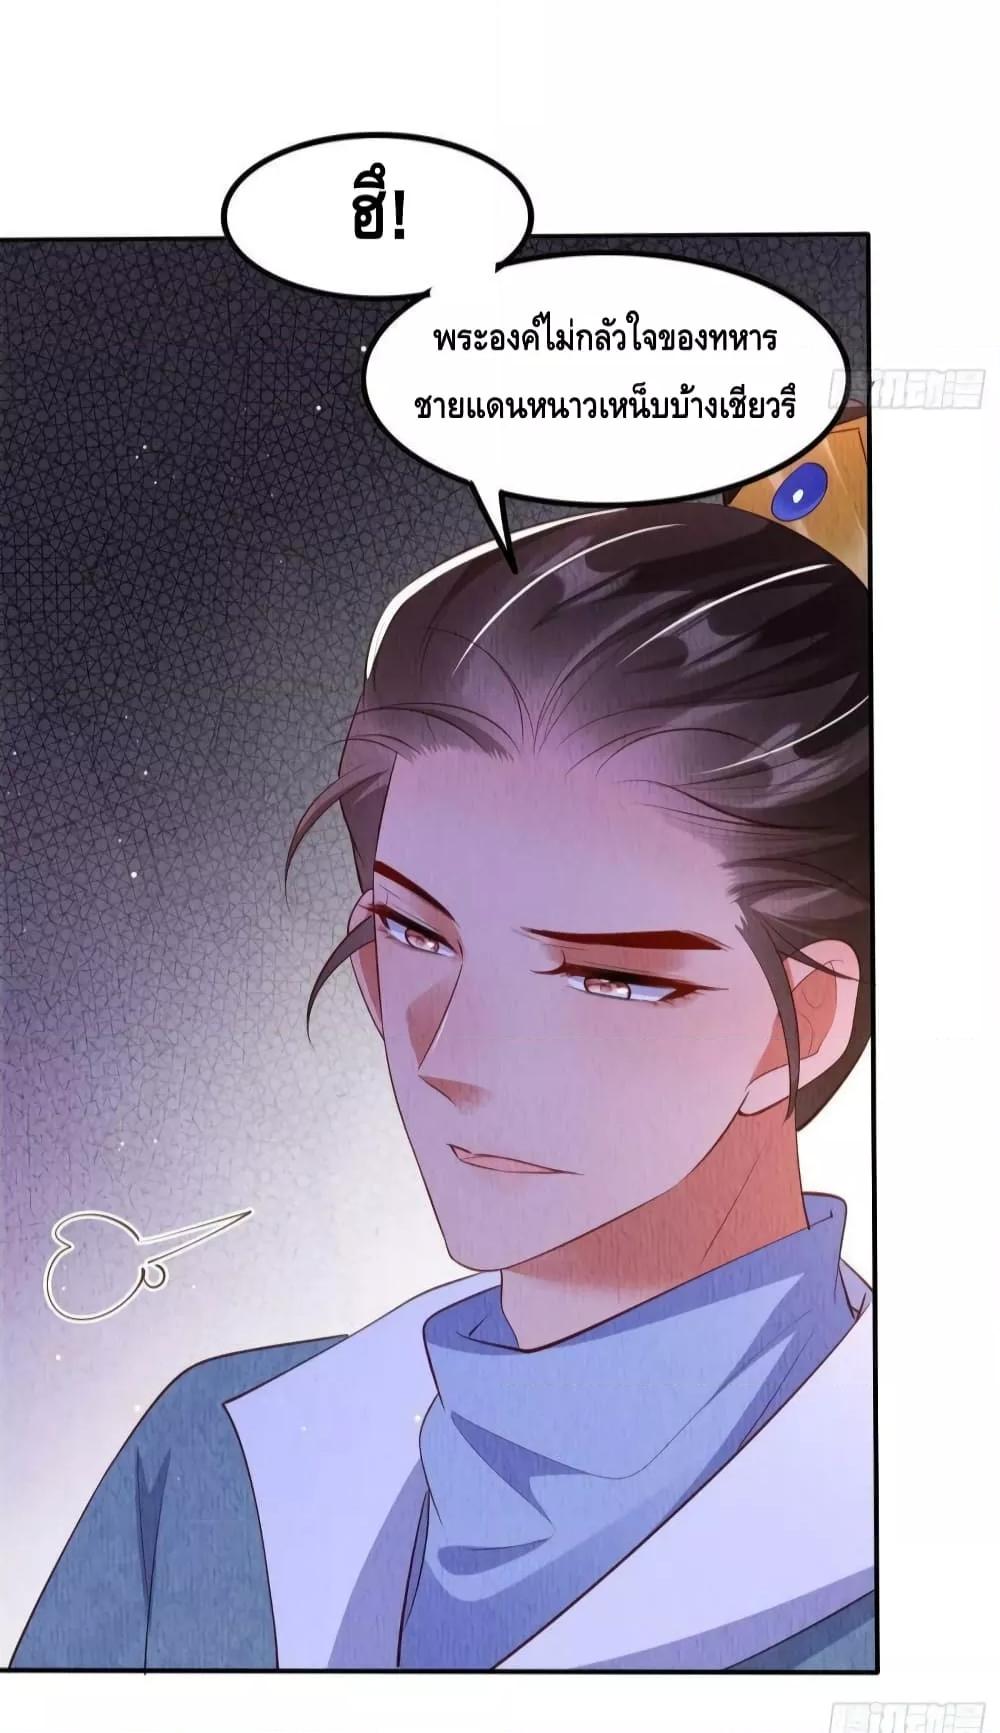 After I Bloom, a Hundred Flowers Will ill – ดอกไม้นับ ตอนที่ 53 (5)